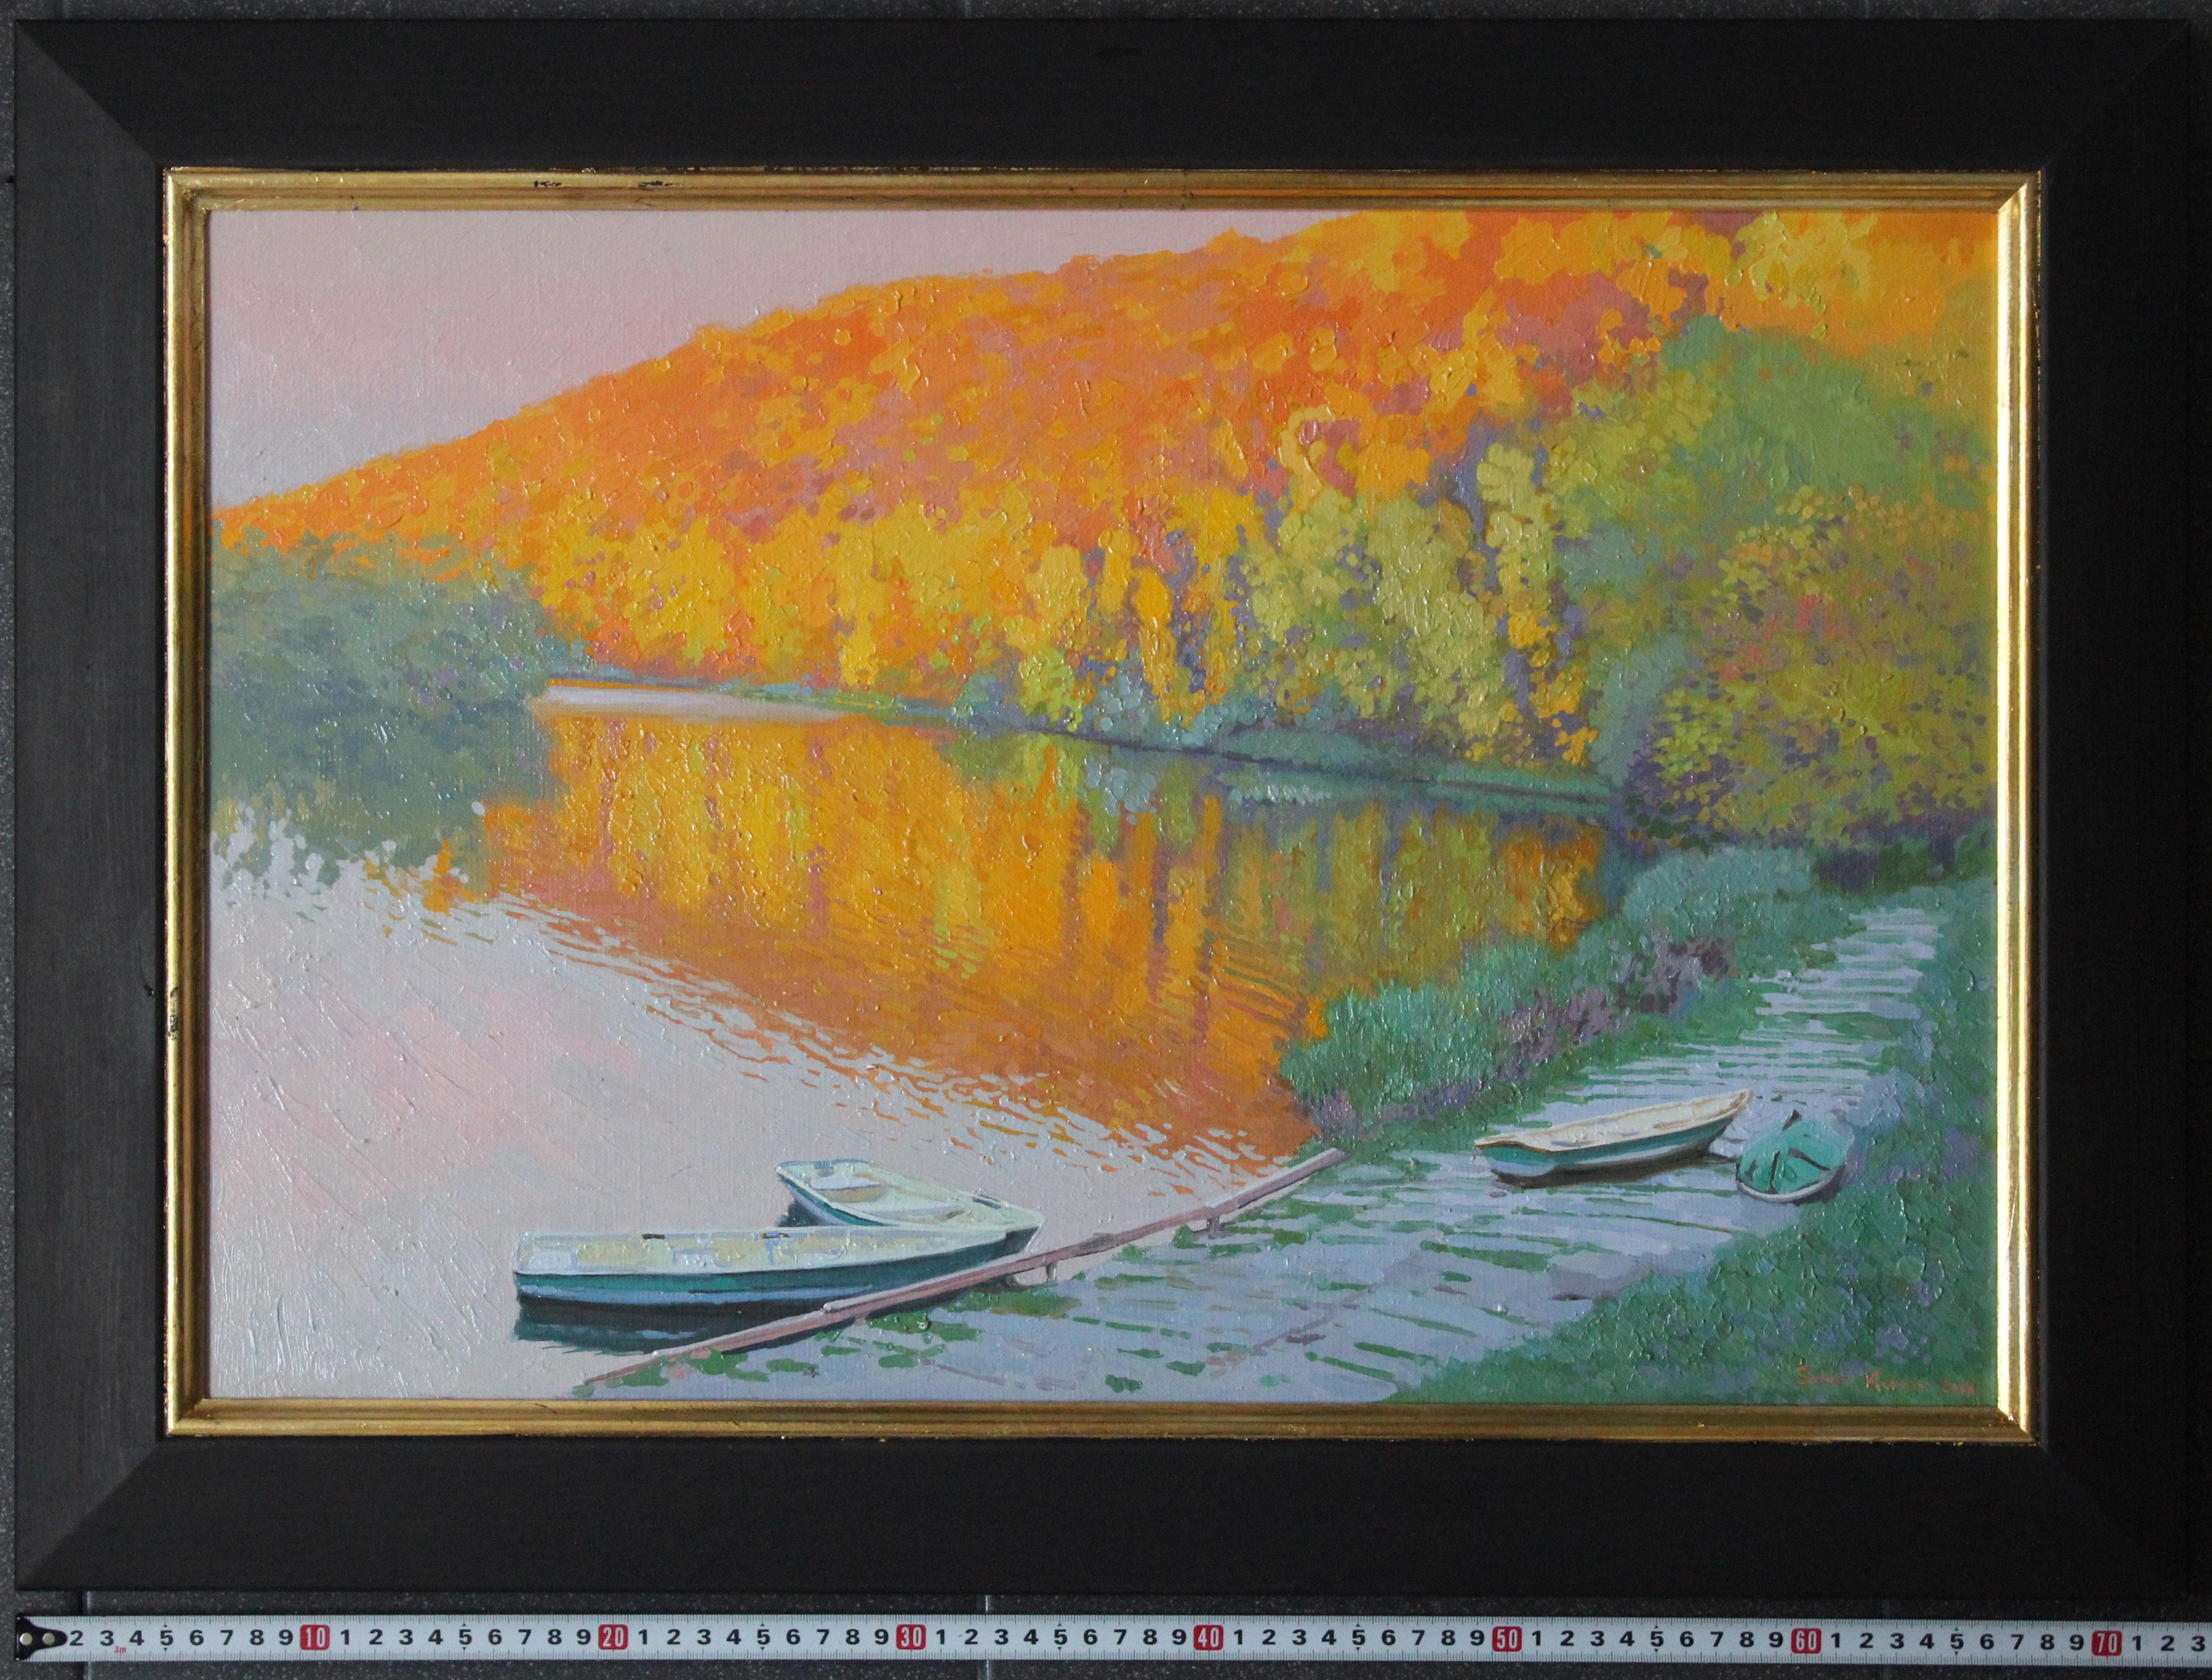 Sunset Landscape Forest and Water with Boats, Krasivaya mecha river painting 6